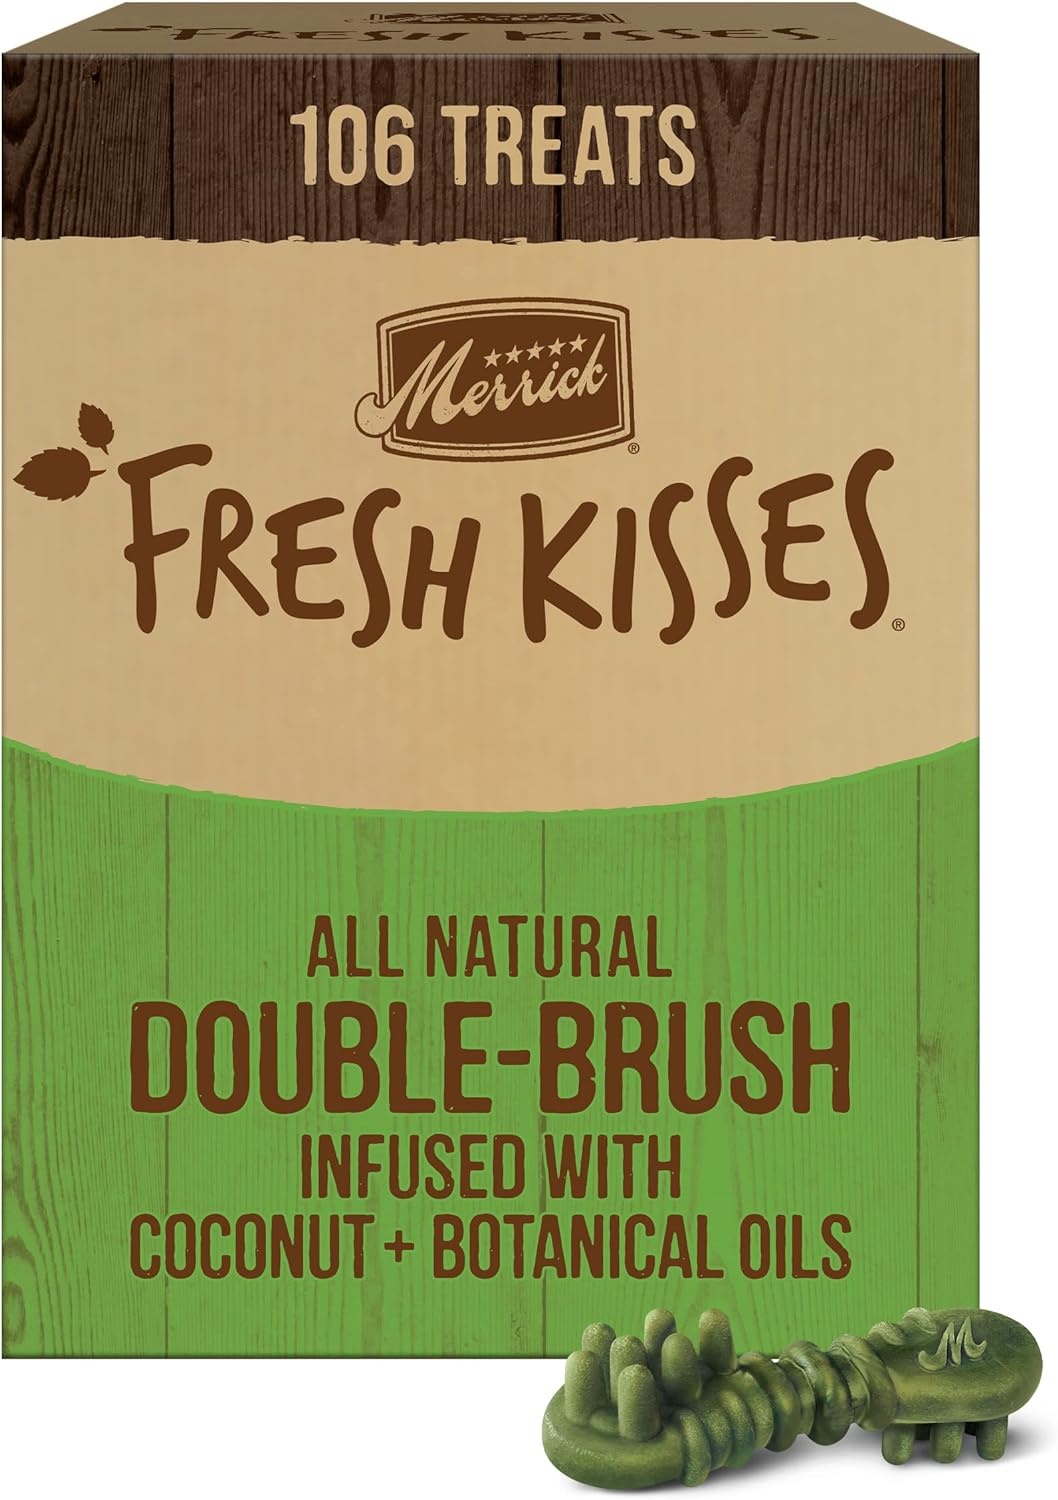 Merrick Fresh Kisses Natural Dental Chews Infused with Coconut and Botanical Oils for Tiny Dogs 5-15 Lbs - 106 ct. Box